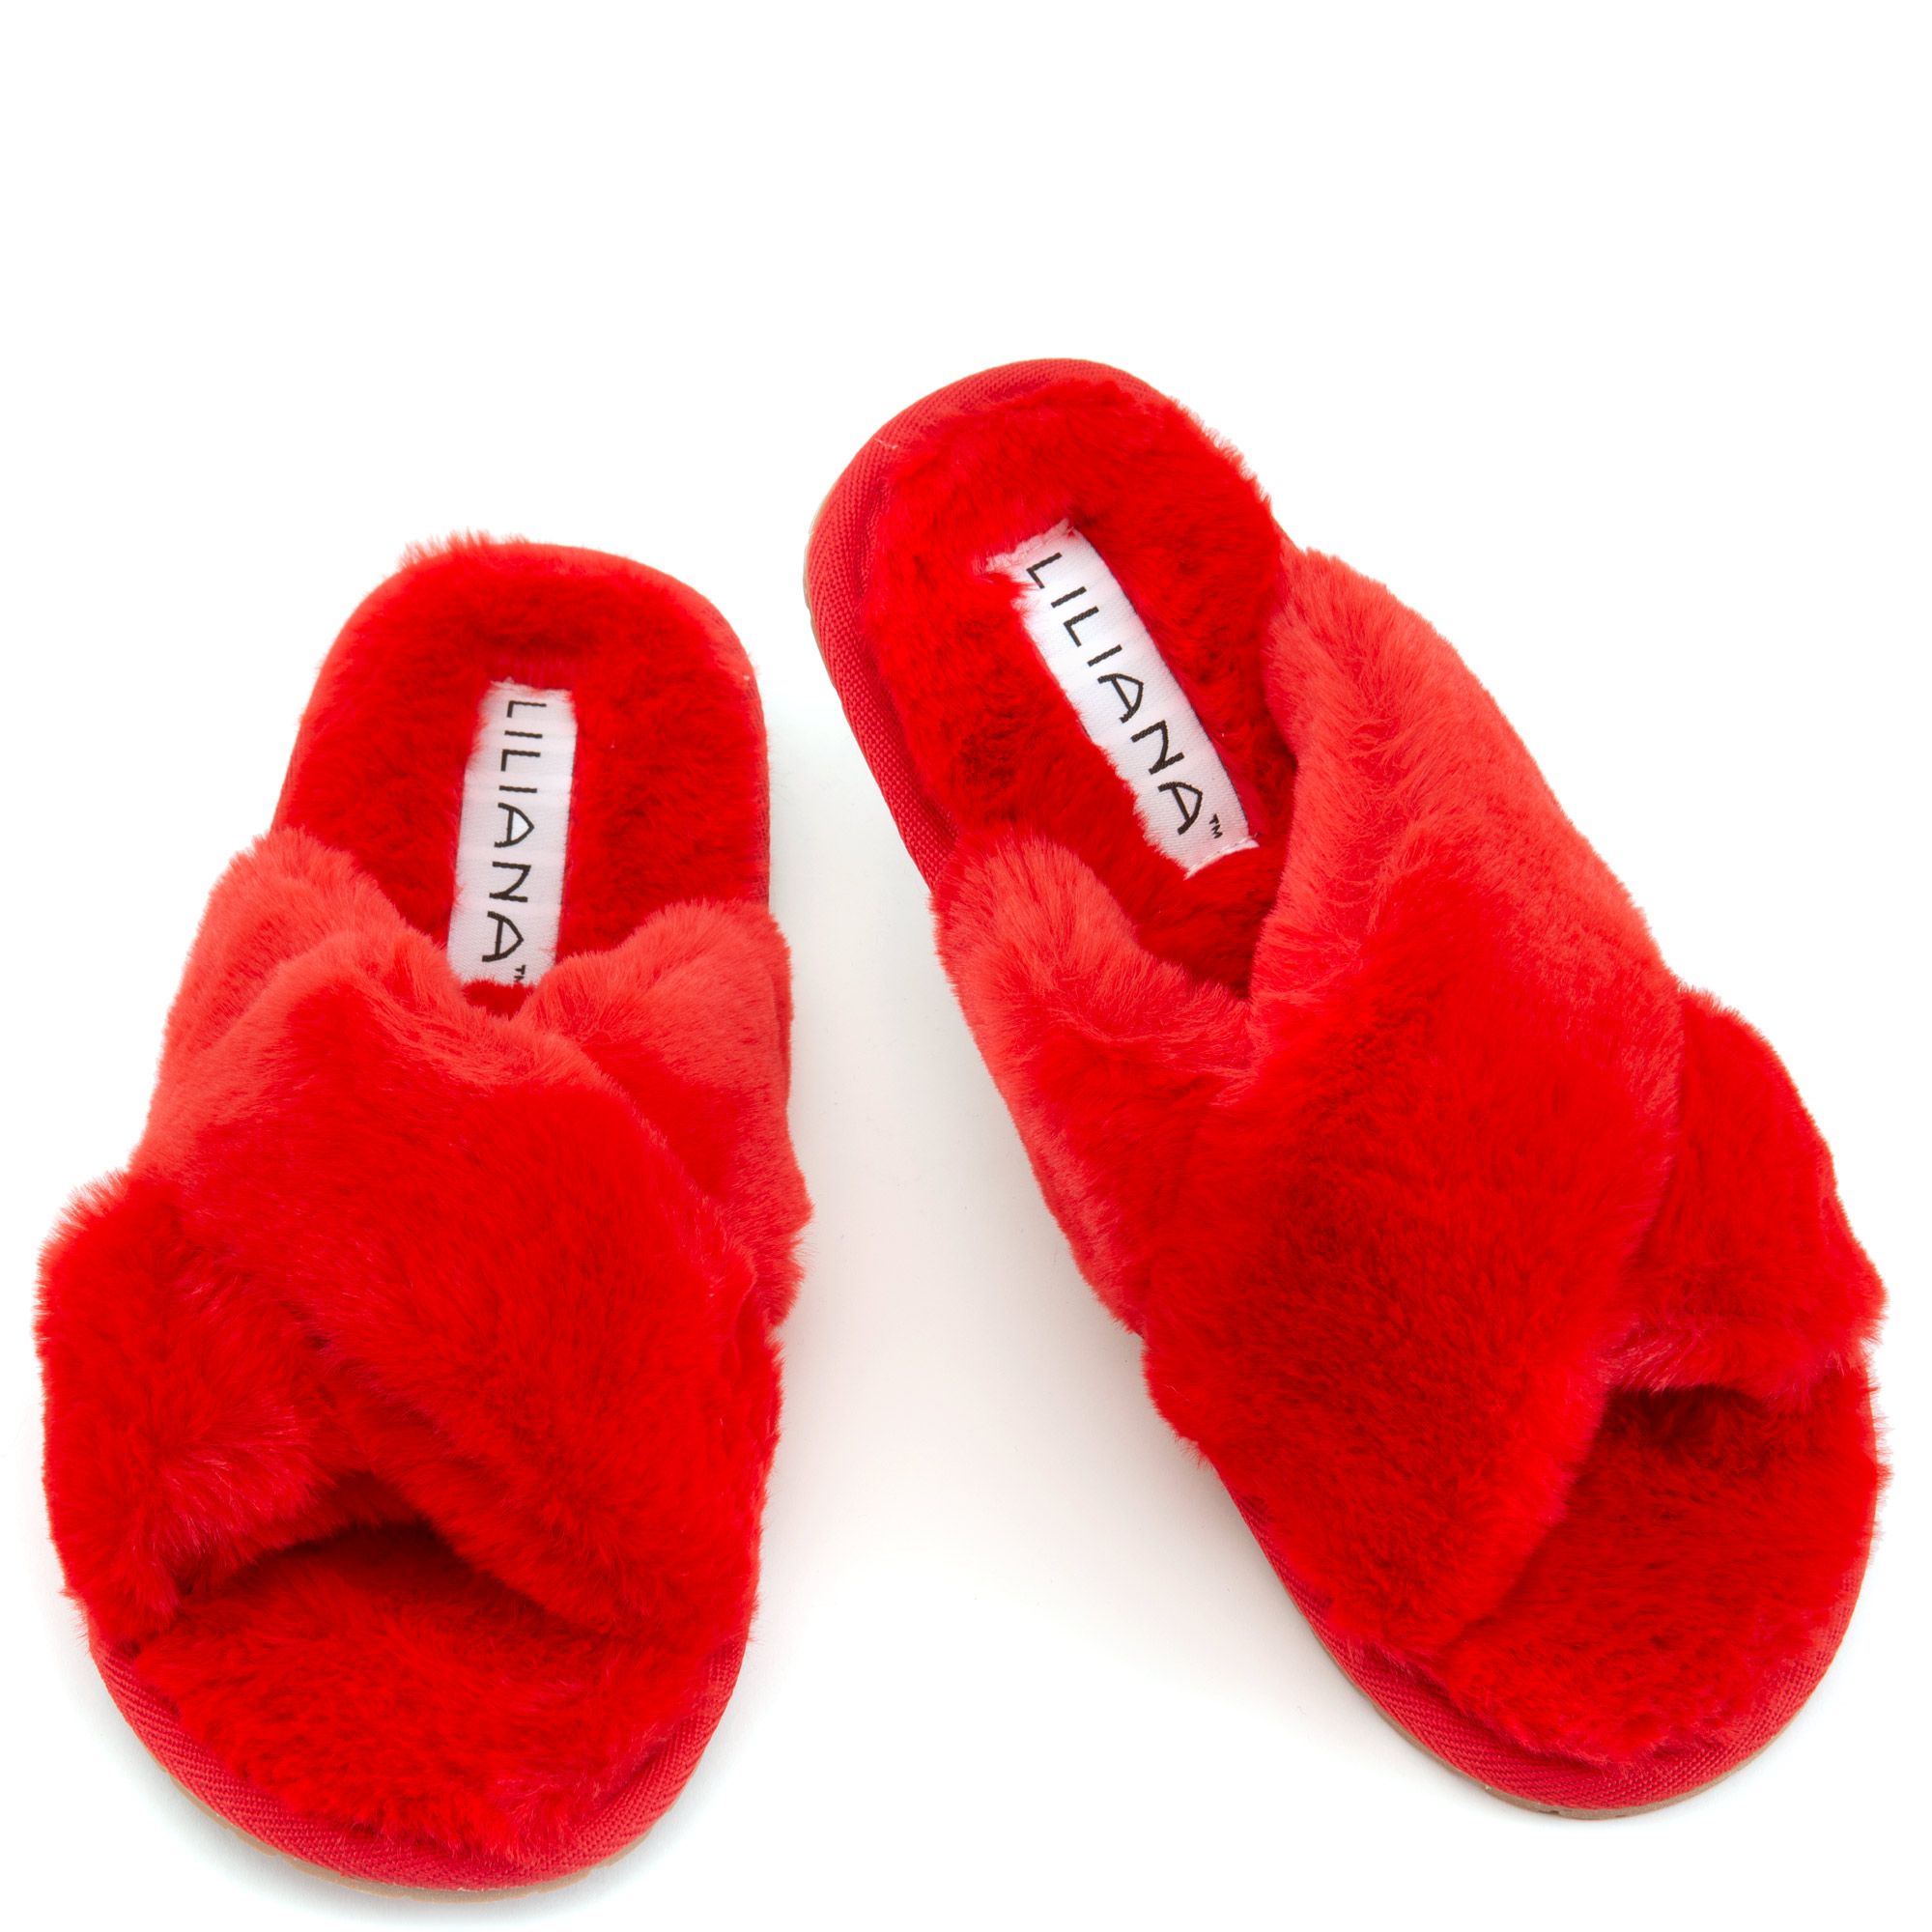 DEARLY-1 FUZZY SLIPPERS DEARLY-1-RED